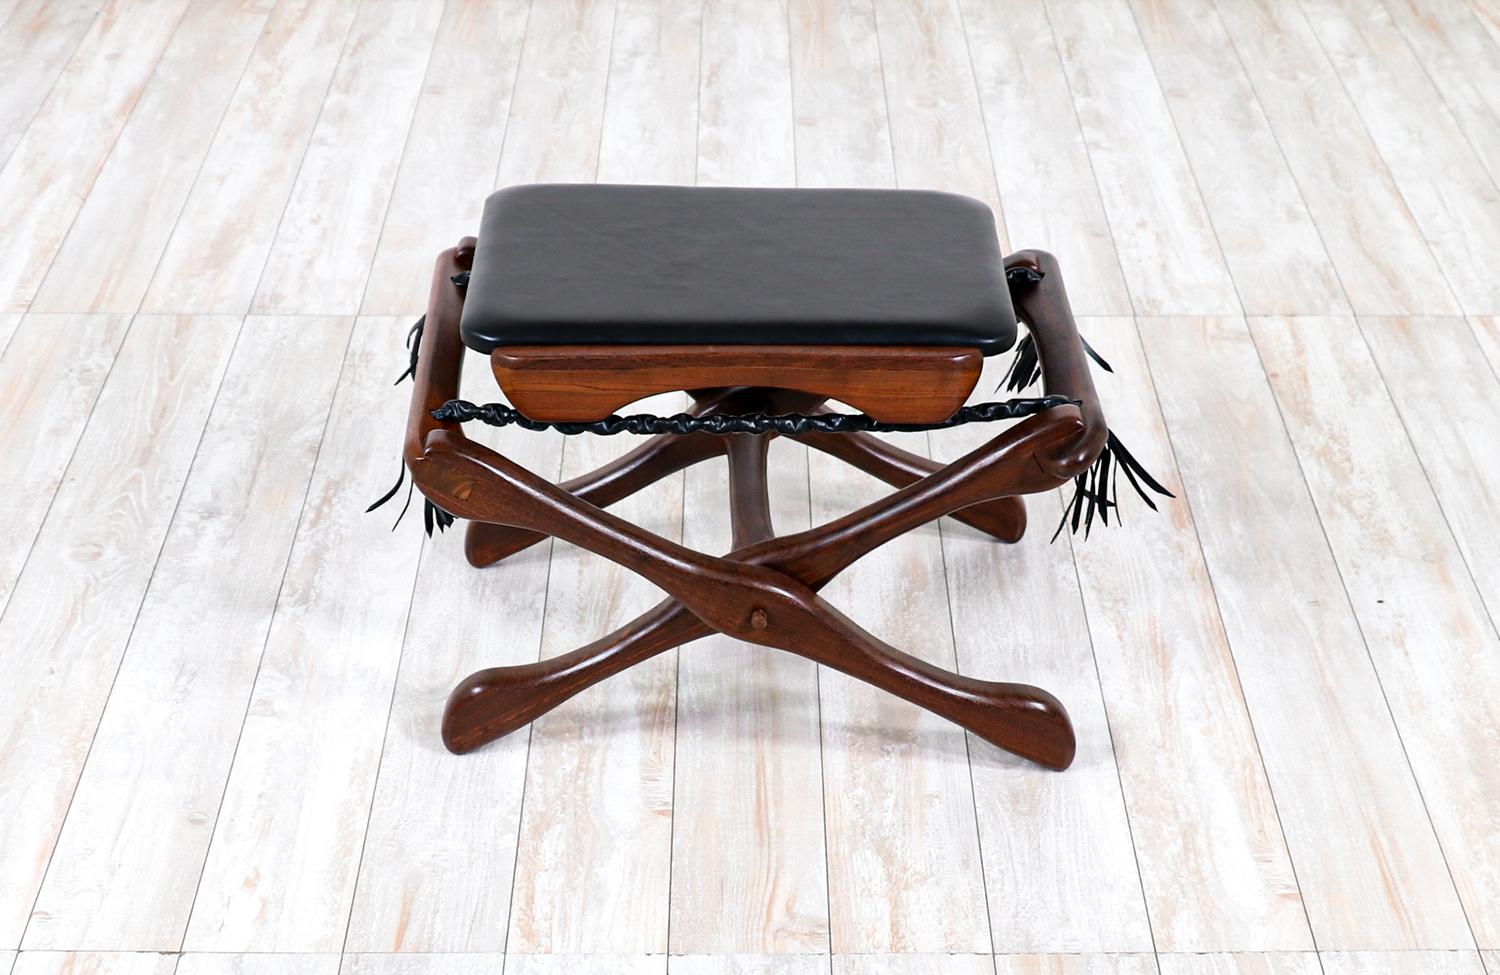 Don Shoemaker Folding Leather & Rosewood Stool for Señal Furniture

________________________________________

Transforming a piece of Mid-Century Modern furniture is like bringing history back to life, and we take this journey with passion and